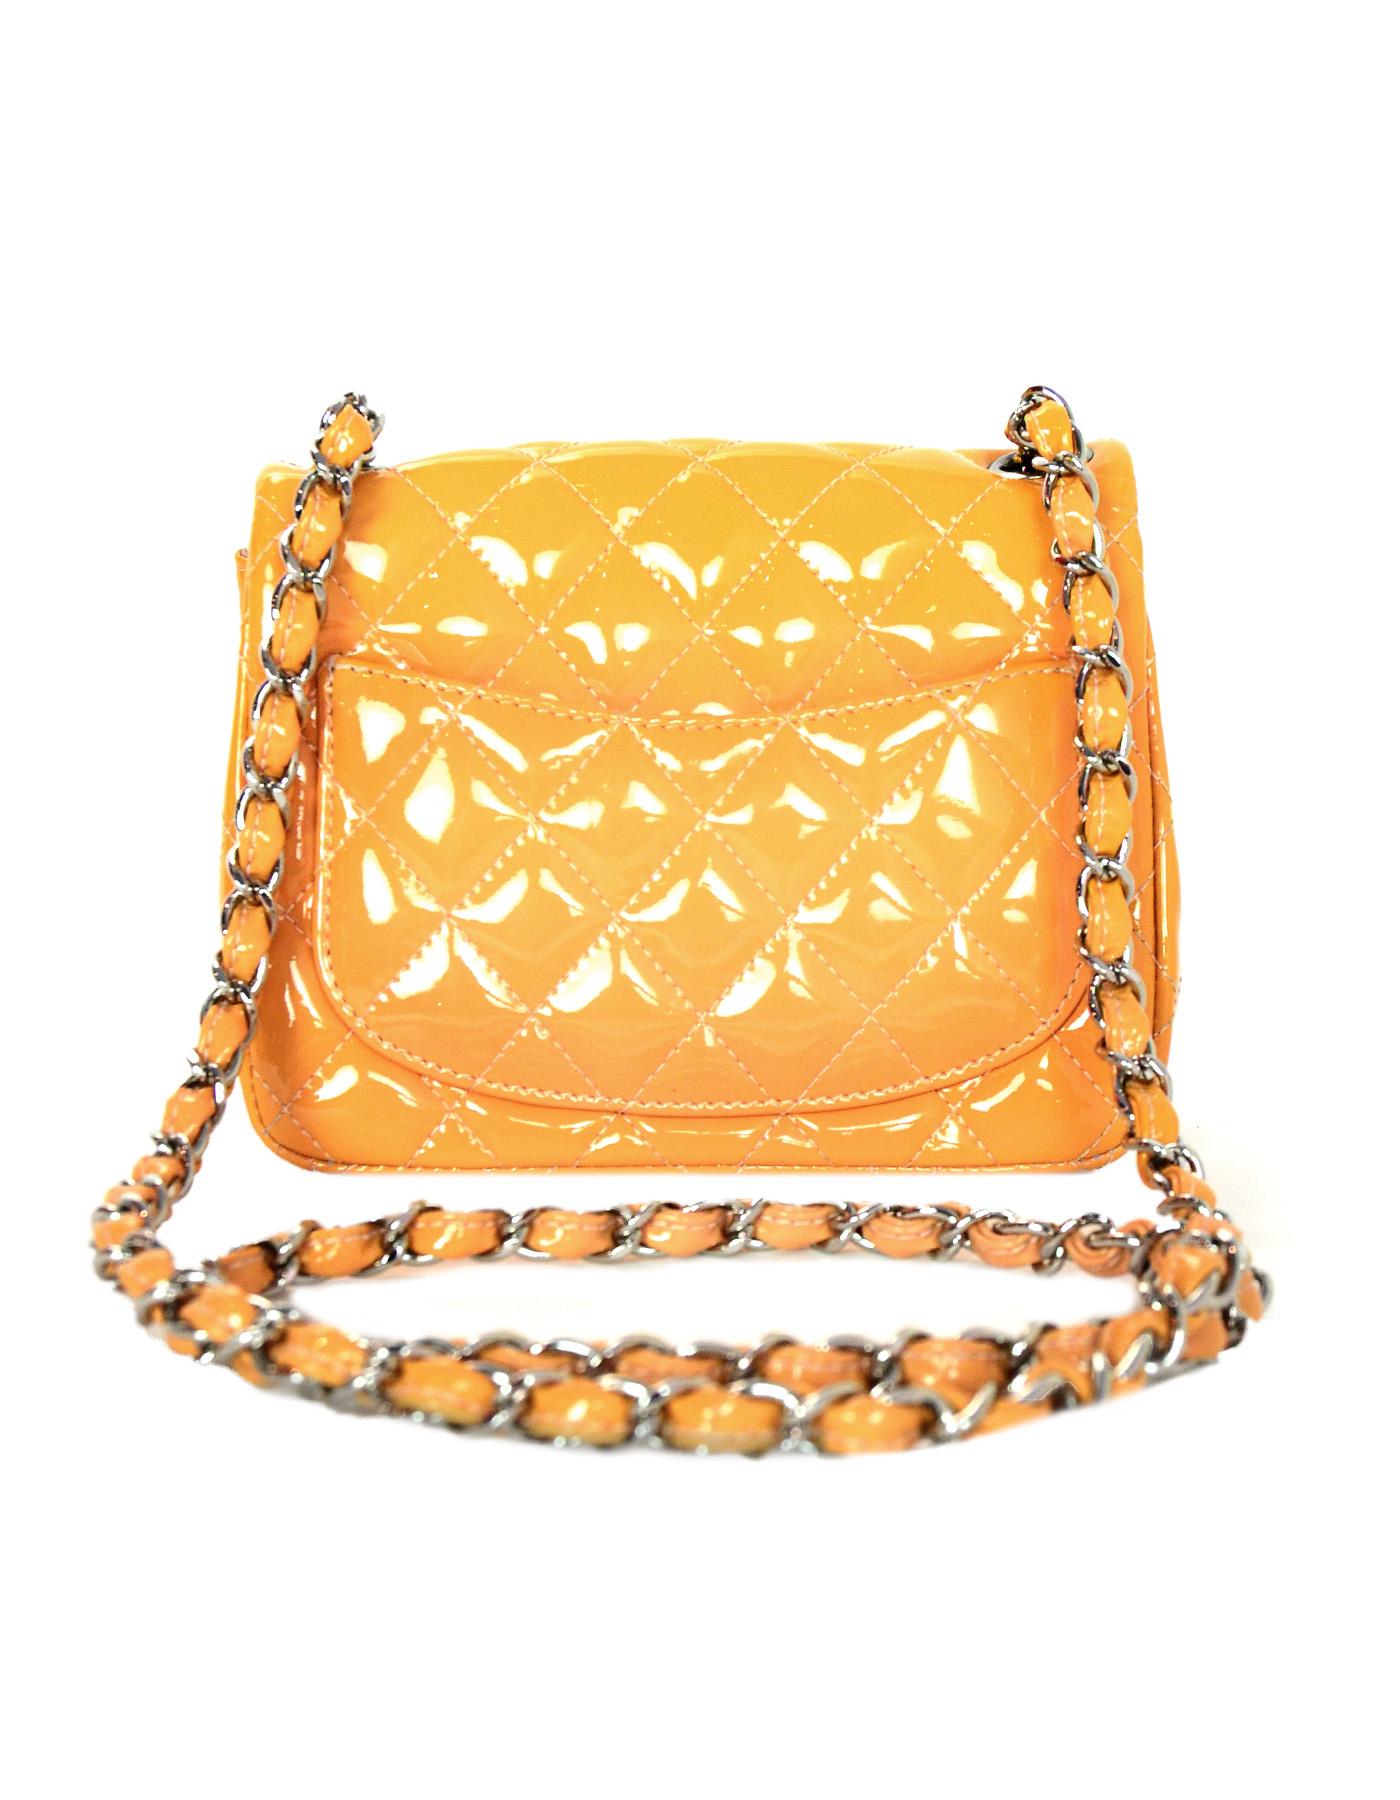 Orange Chanel Peach Patent Leather Quilted Square Mini Classic Crossbody Flap Bag 